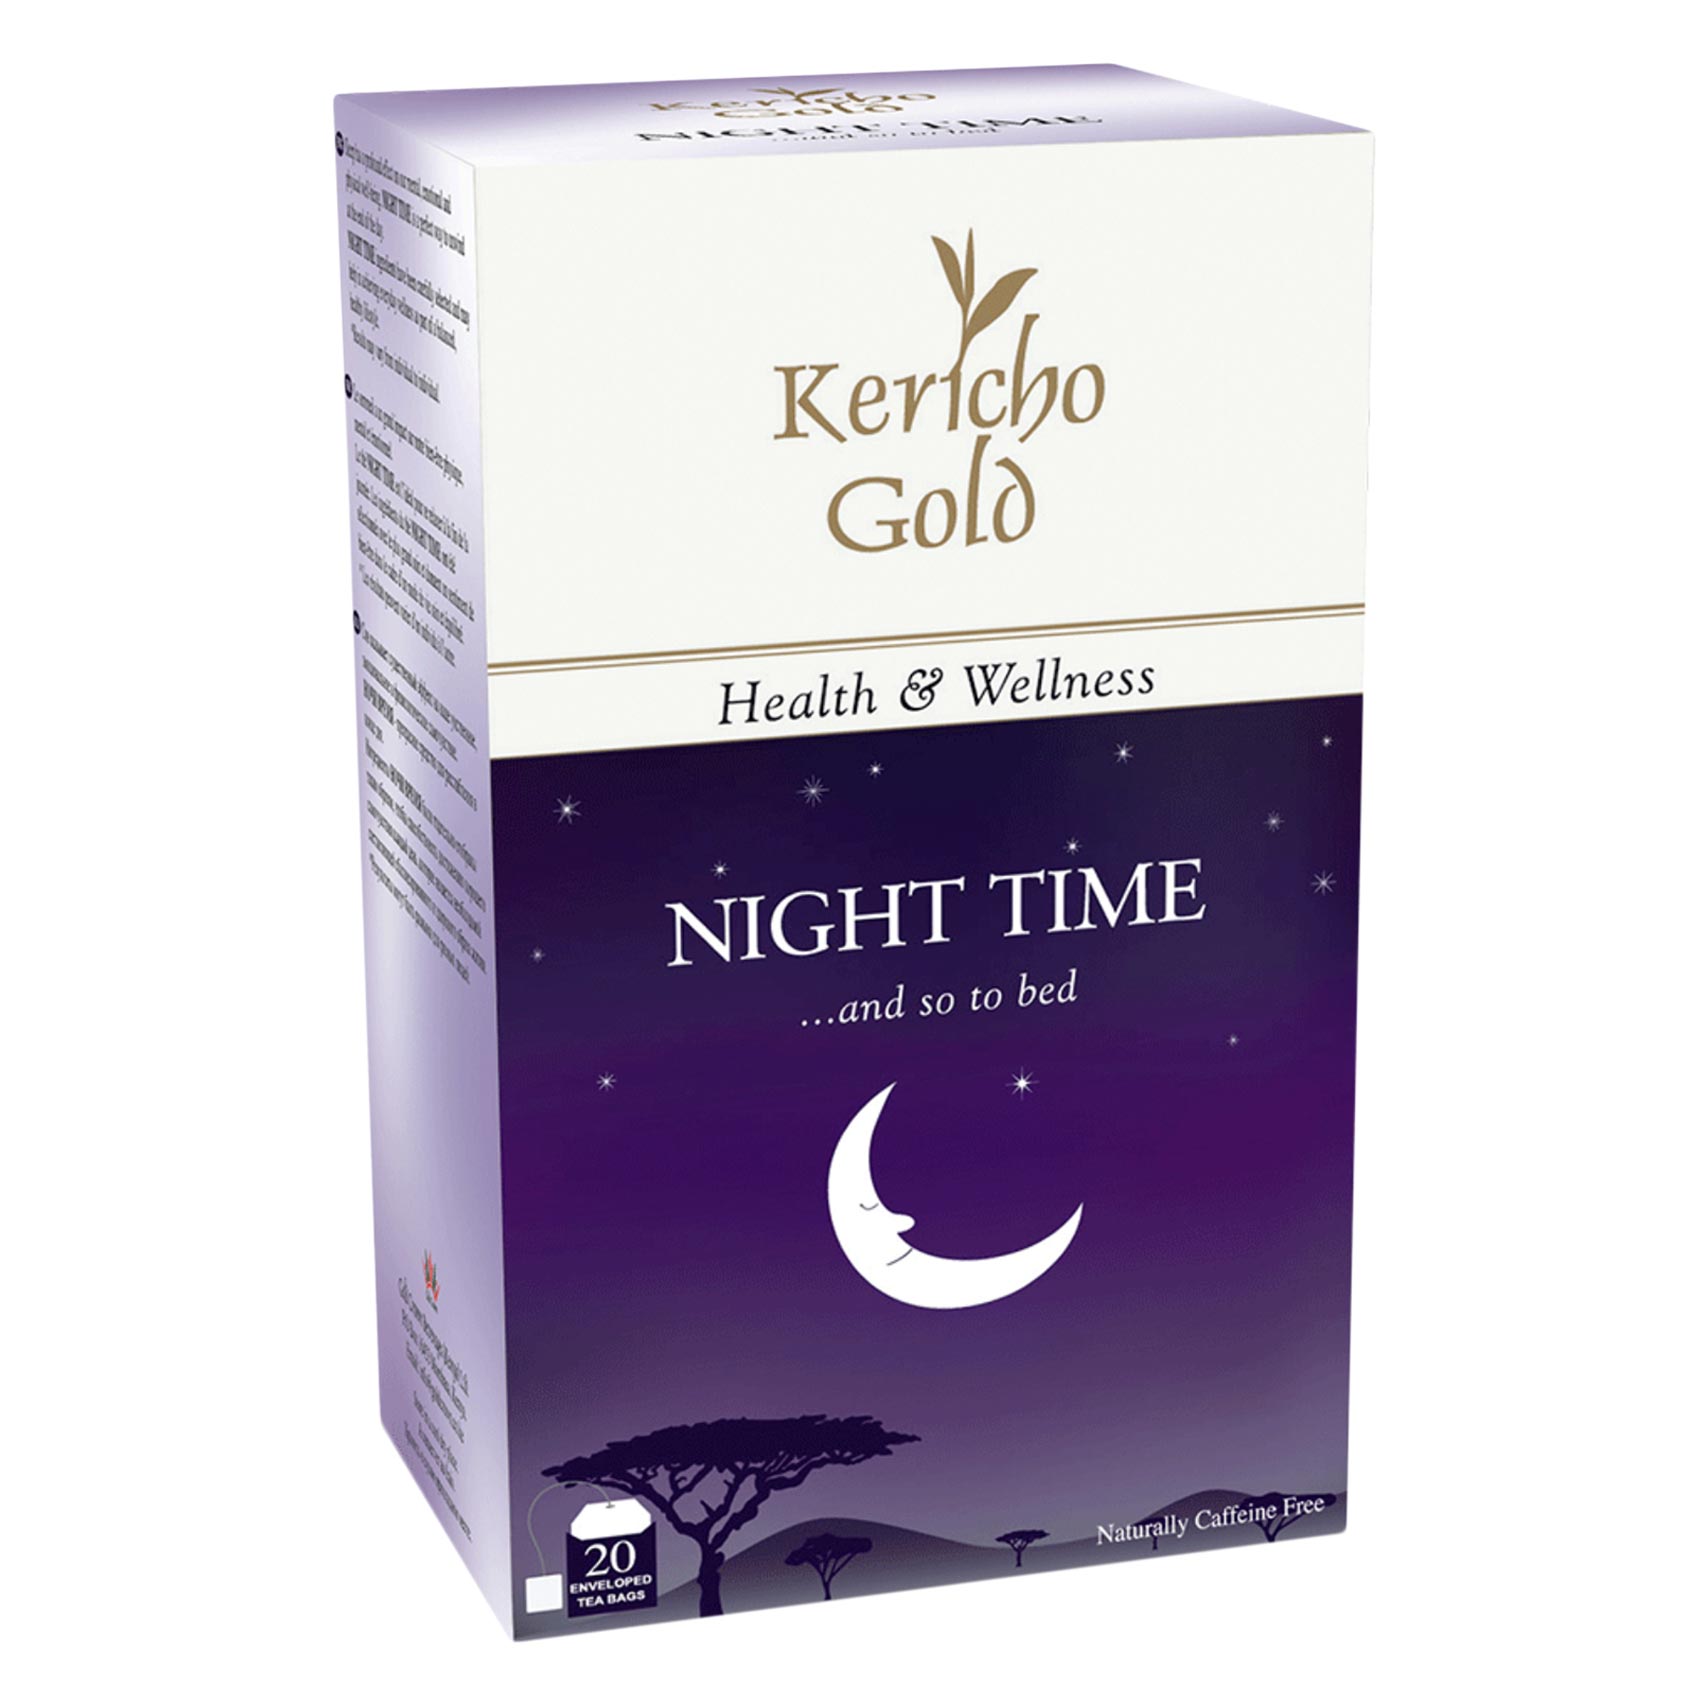 Kericho Gold Night Time Tea Bags 2g x Pack of 20